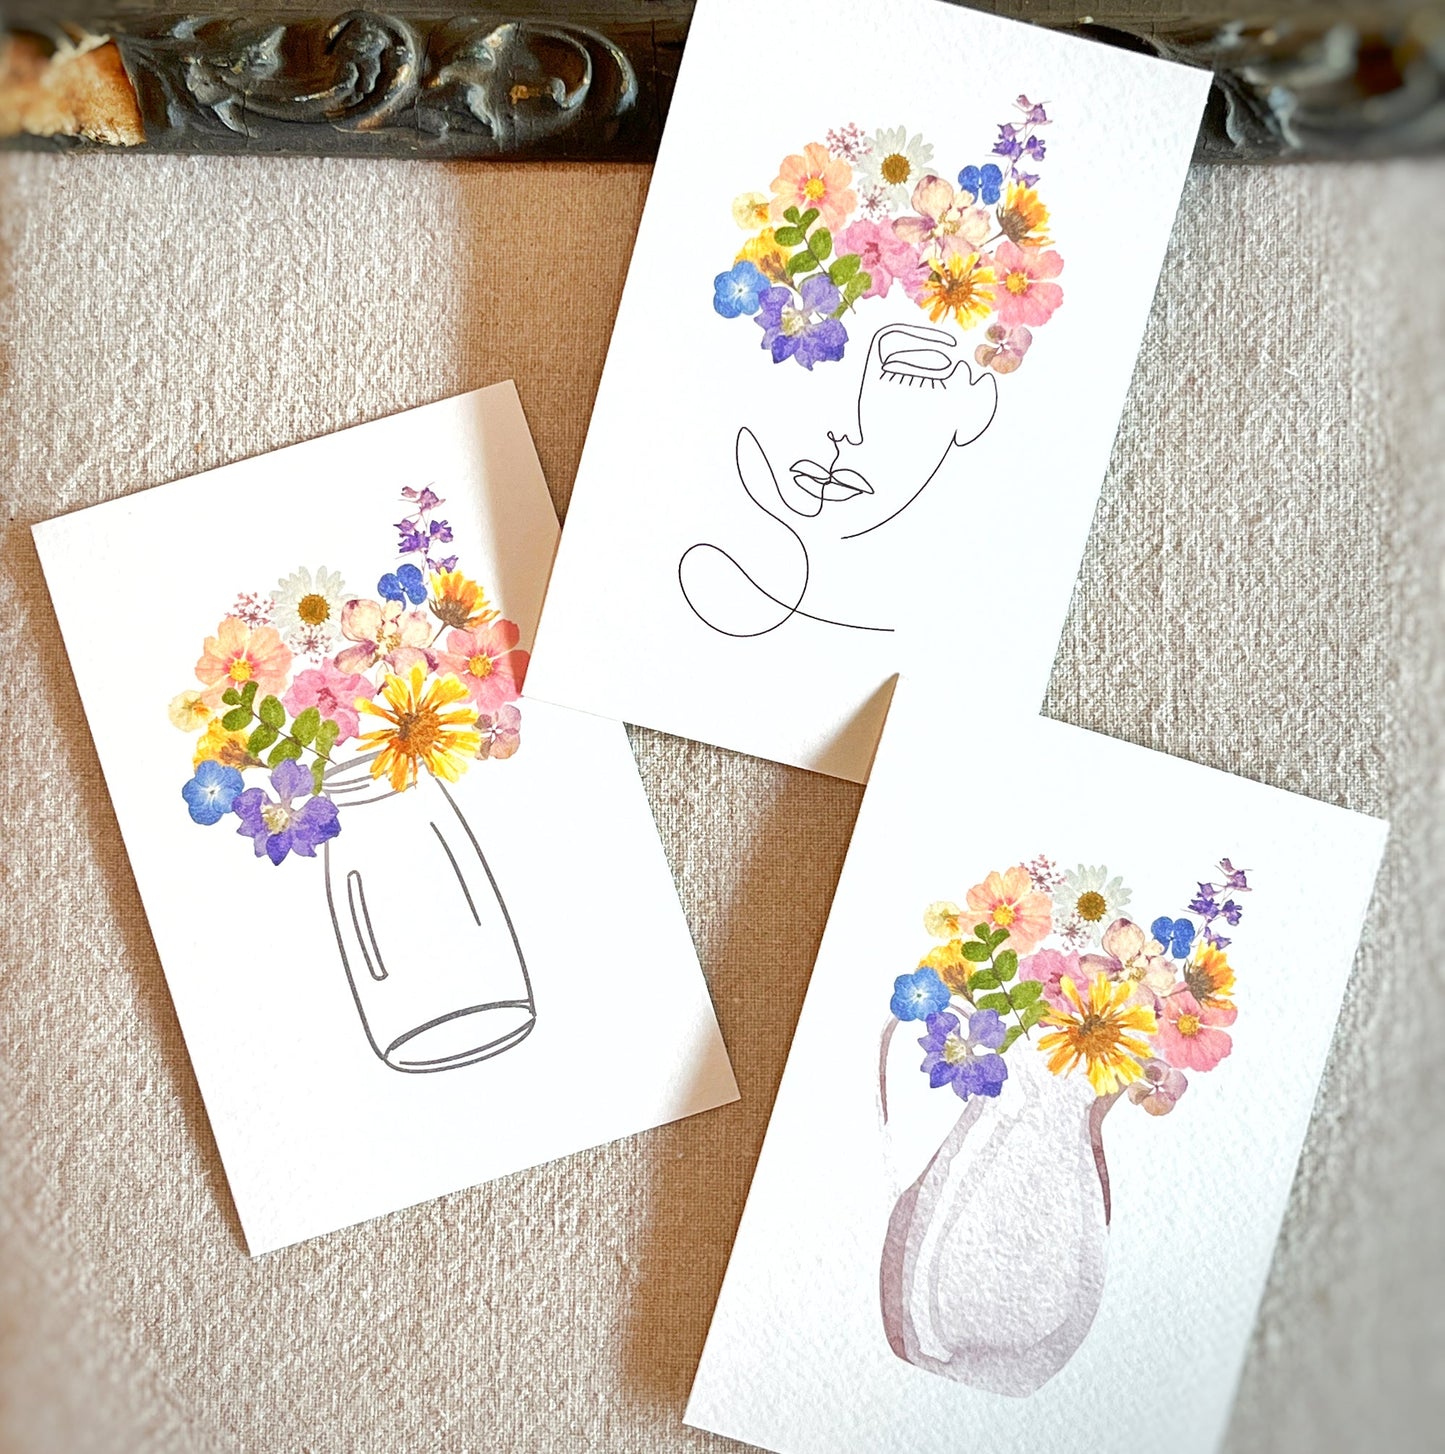 Pressed Floral Art Cards - Autumn and Ro